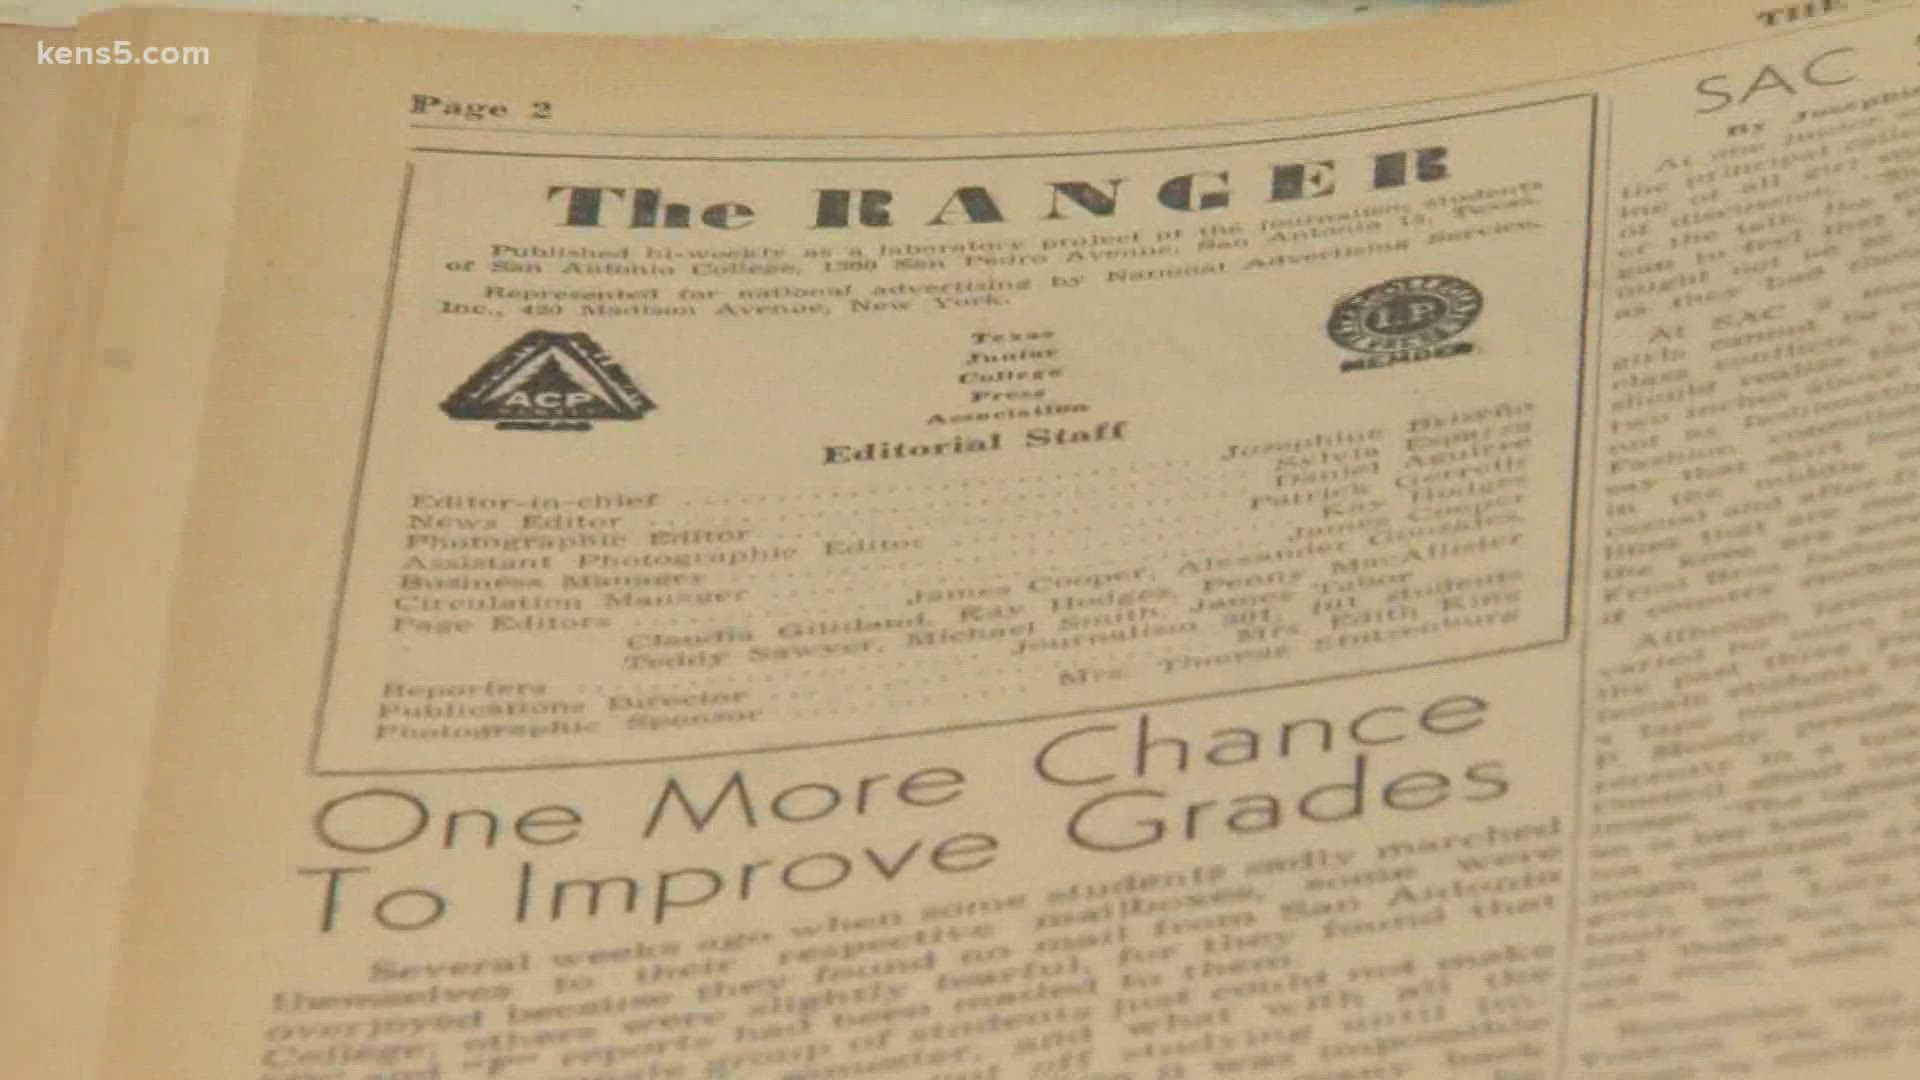 After 95 years, 'The Ranger' will no longer publish articles online or in print. SAC says it's developing a plan to maintain student media programs on campus.